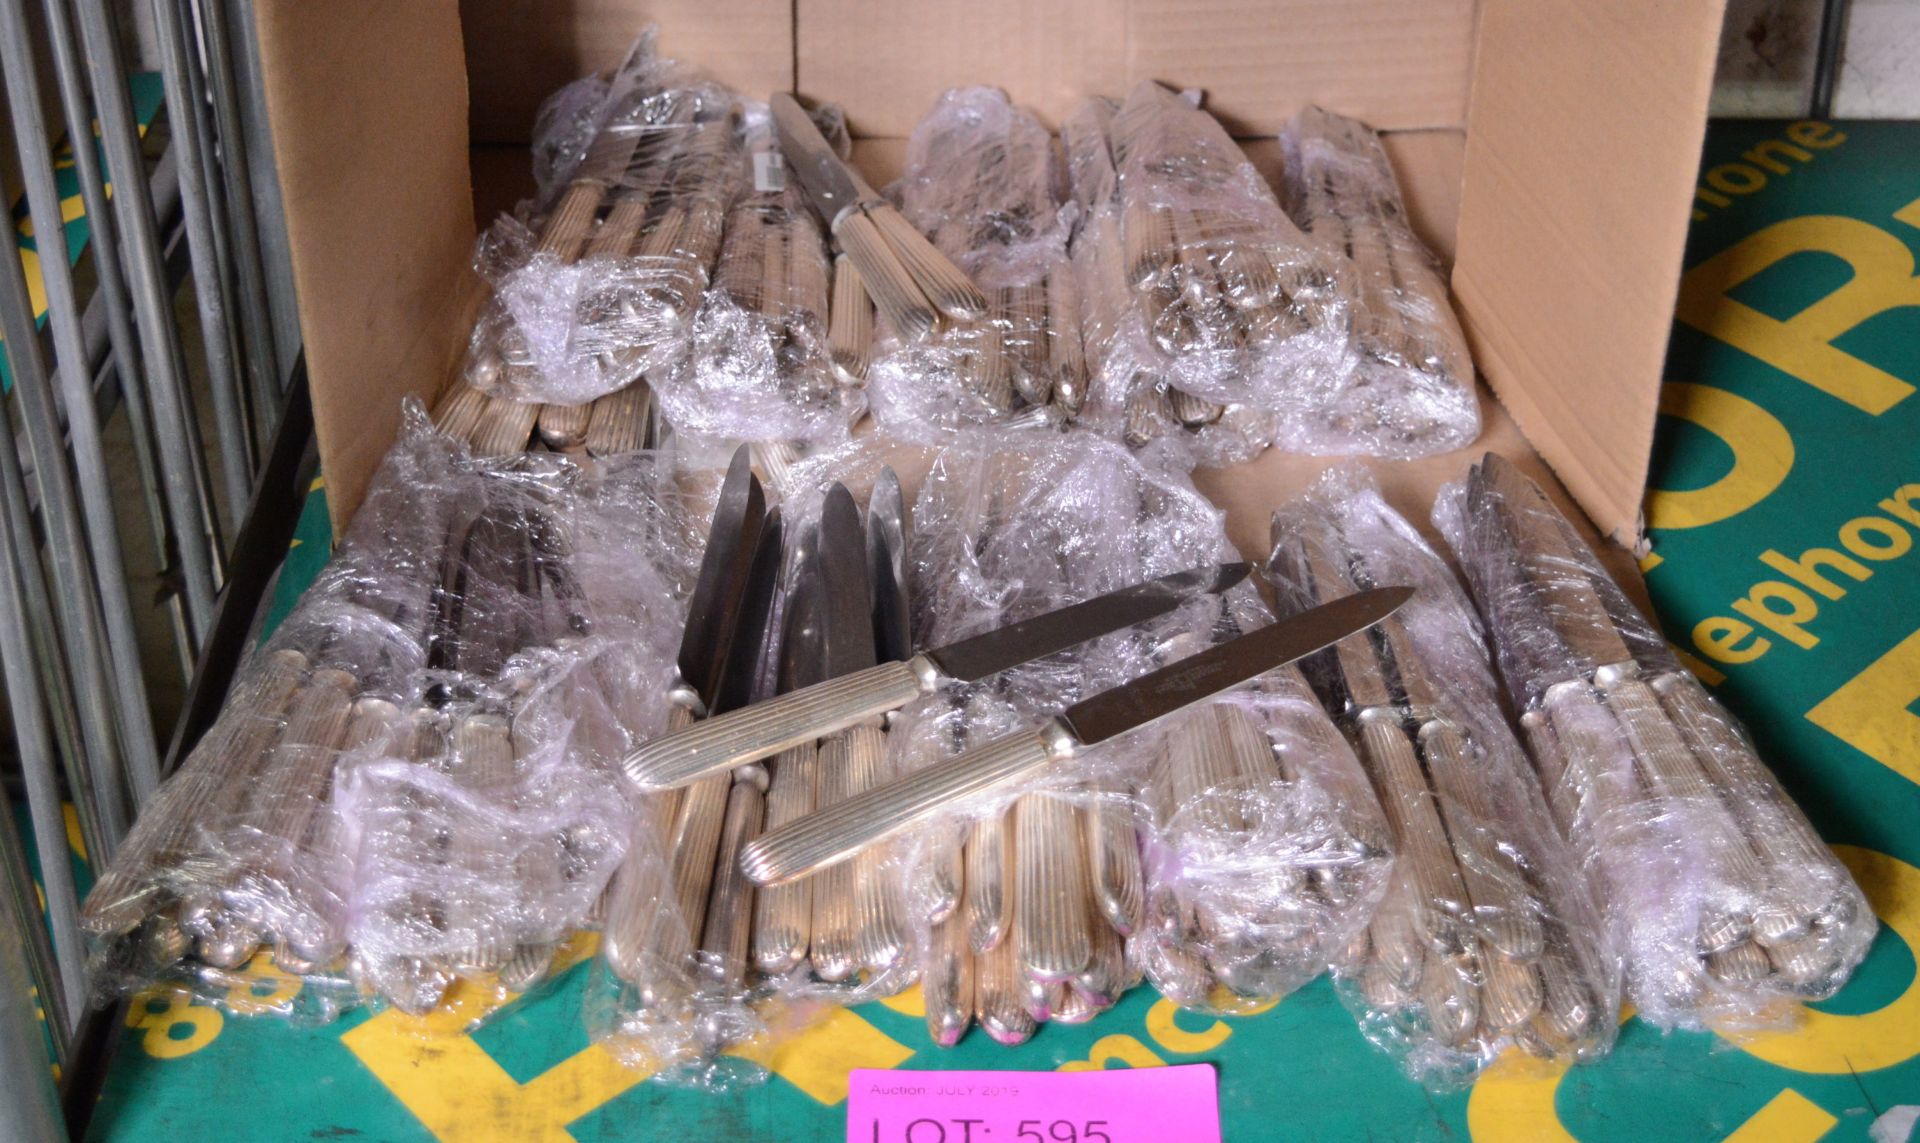 142x EPNS Dessert Knives - SALE TO OVER 18s ONLY.